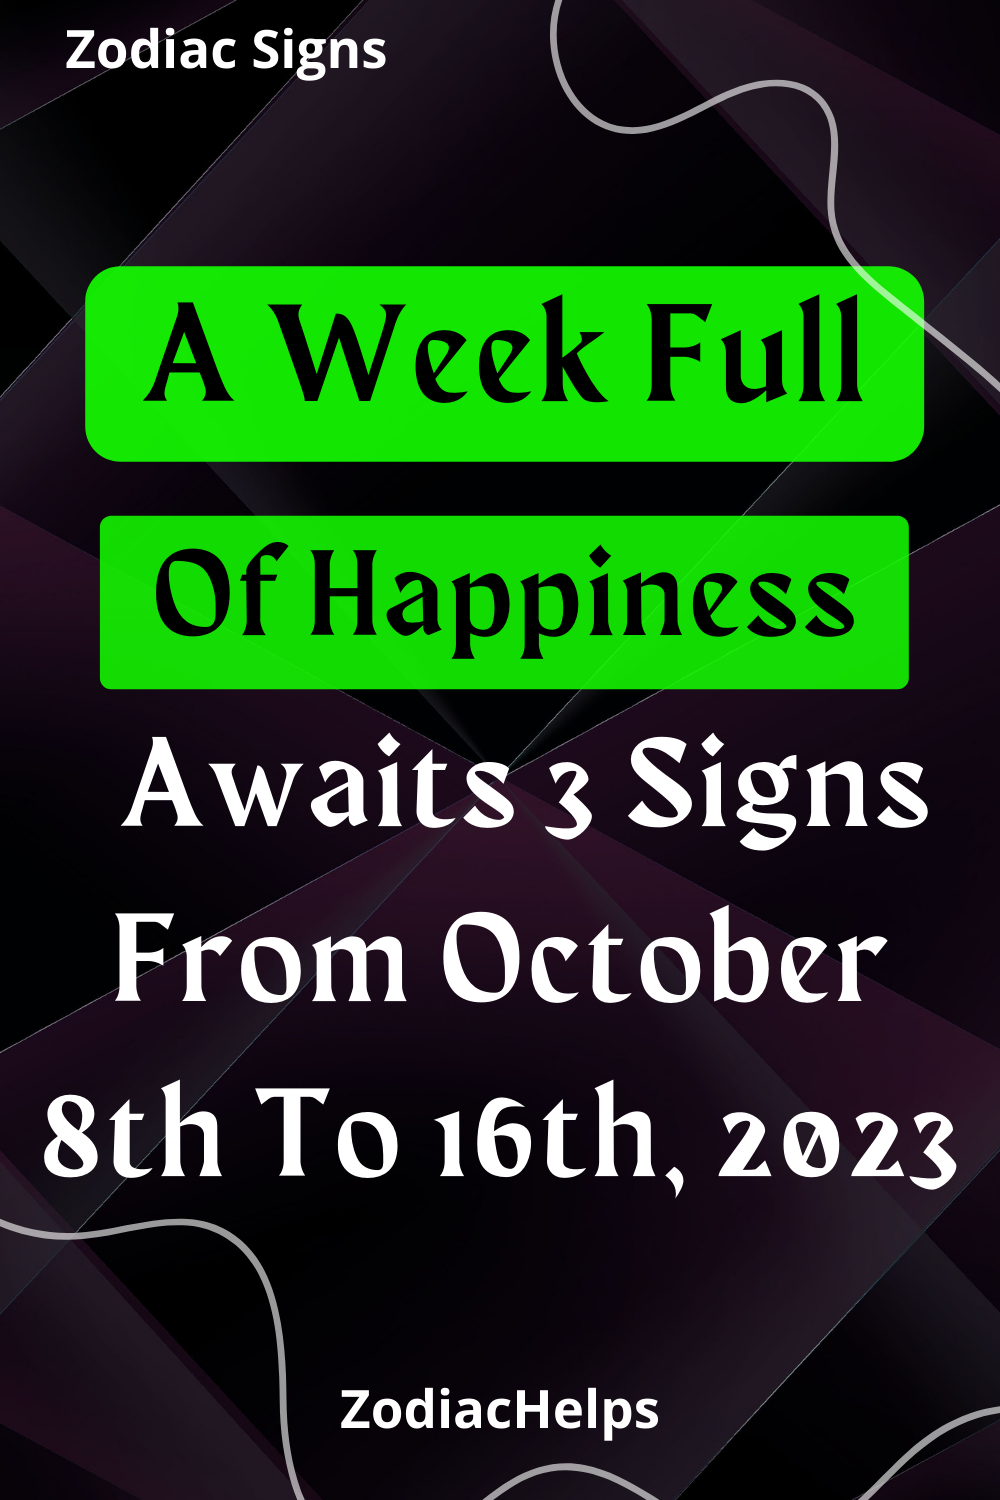 A Week Full Of Happiness Awaits 3 Signs From October 8th To 16th, 2023